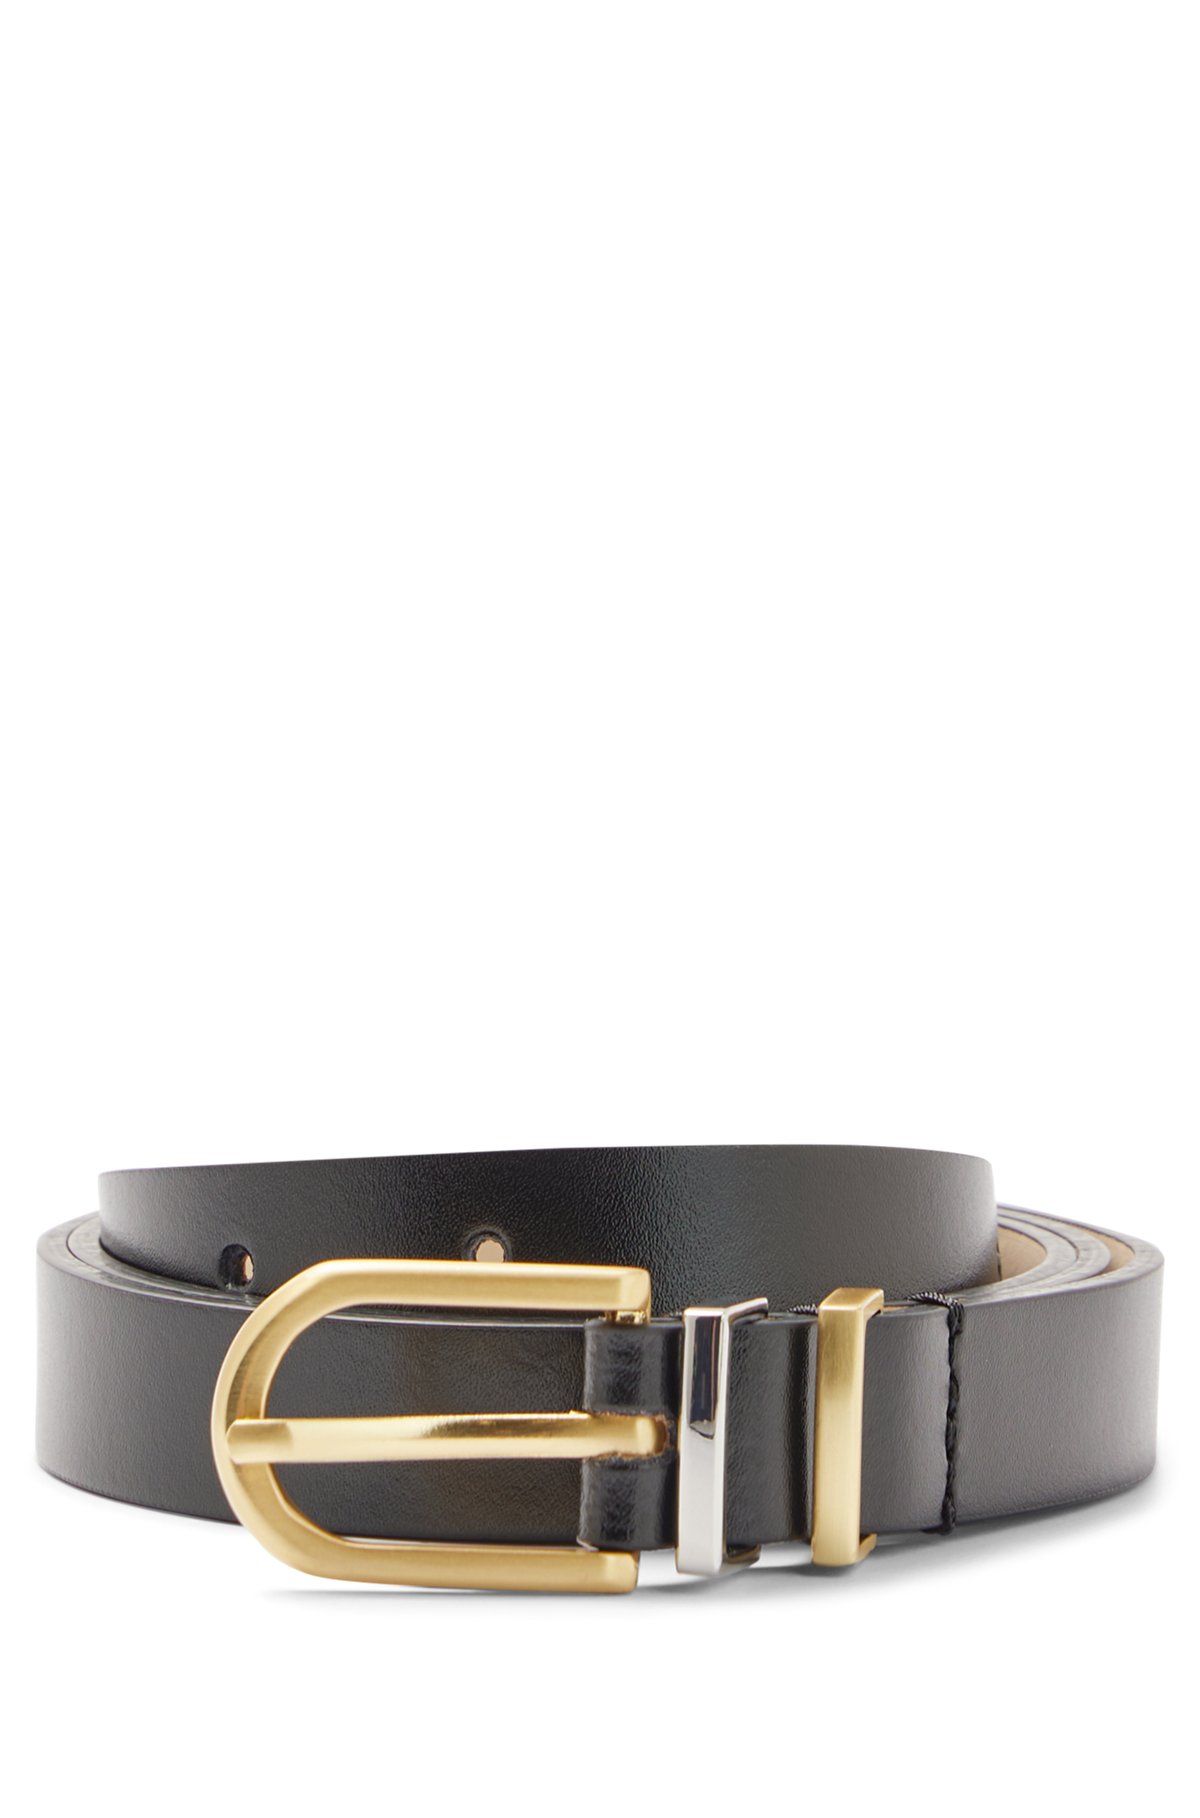 Italian-leather belt with double keeper, Black